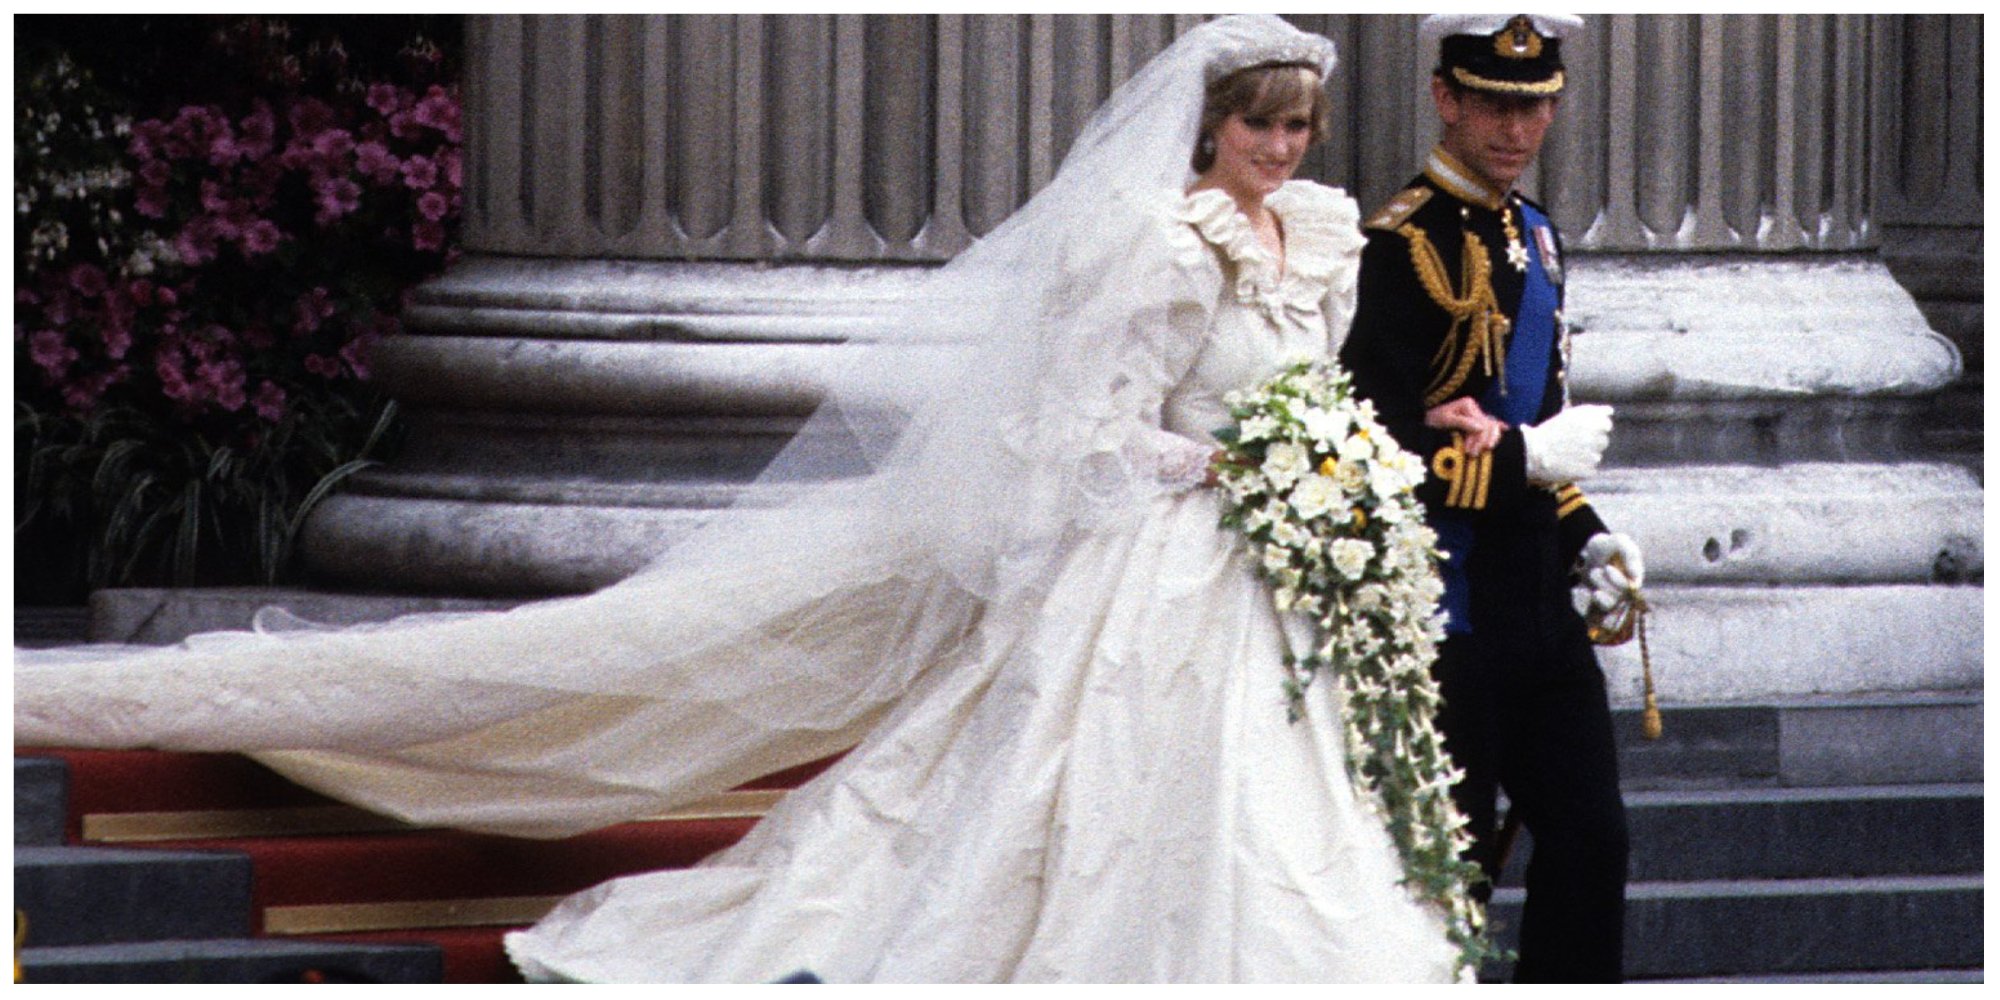 Princess Diana's wedding dress was a stunning accessory during her marriage to Prince Charles' on July 29, 1981.